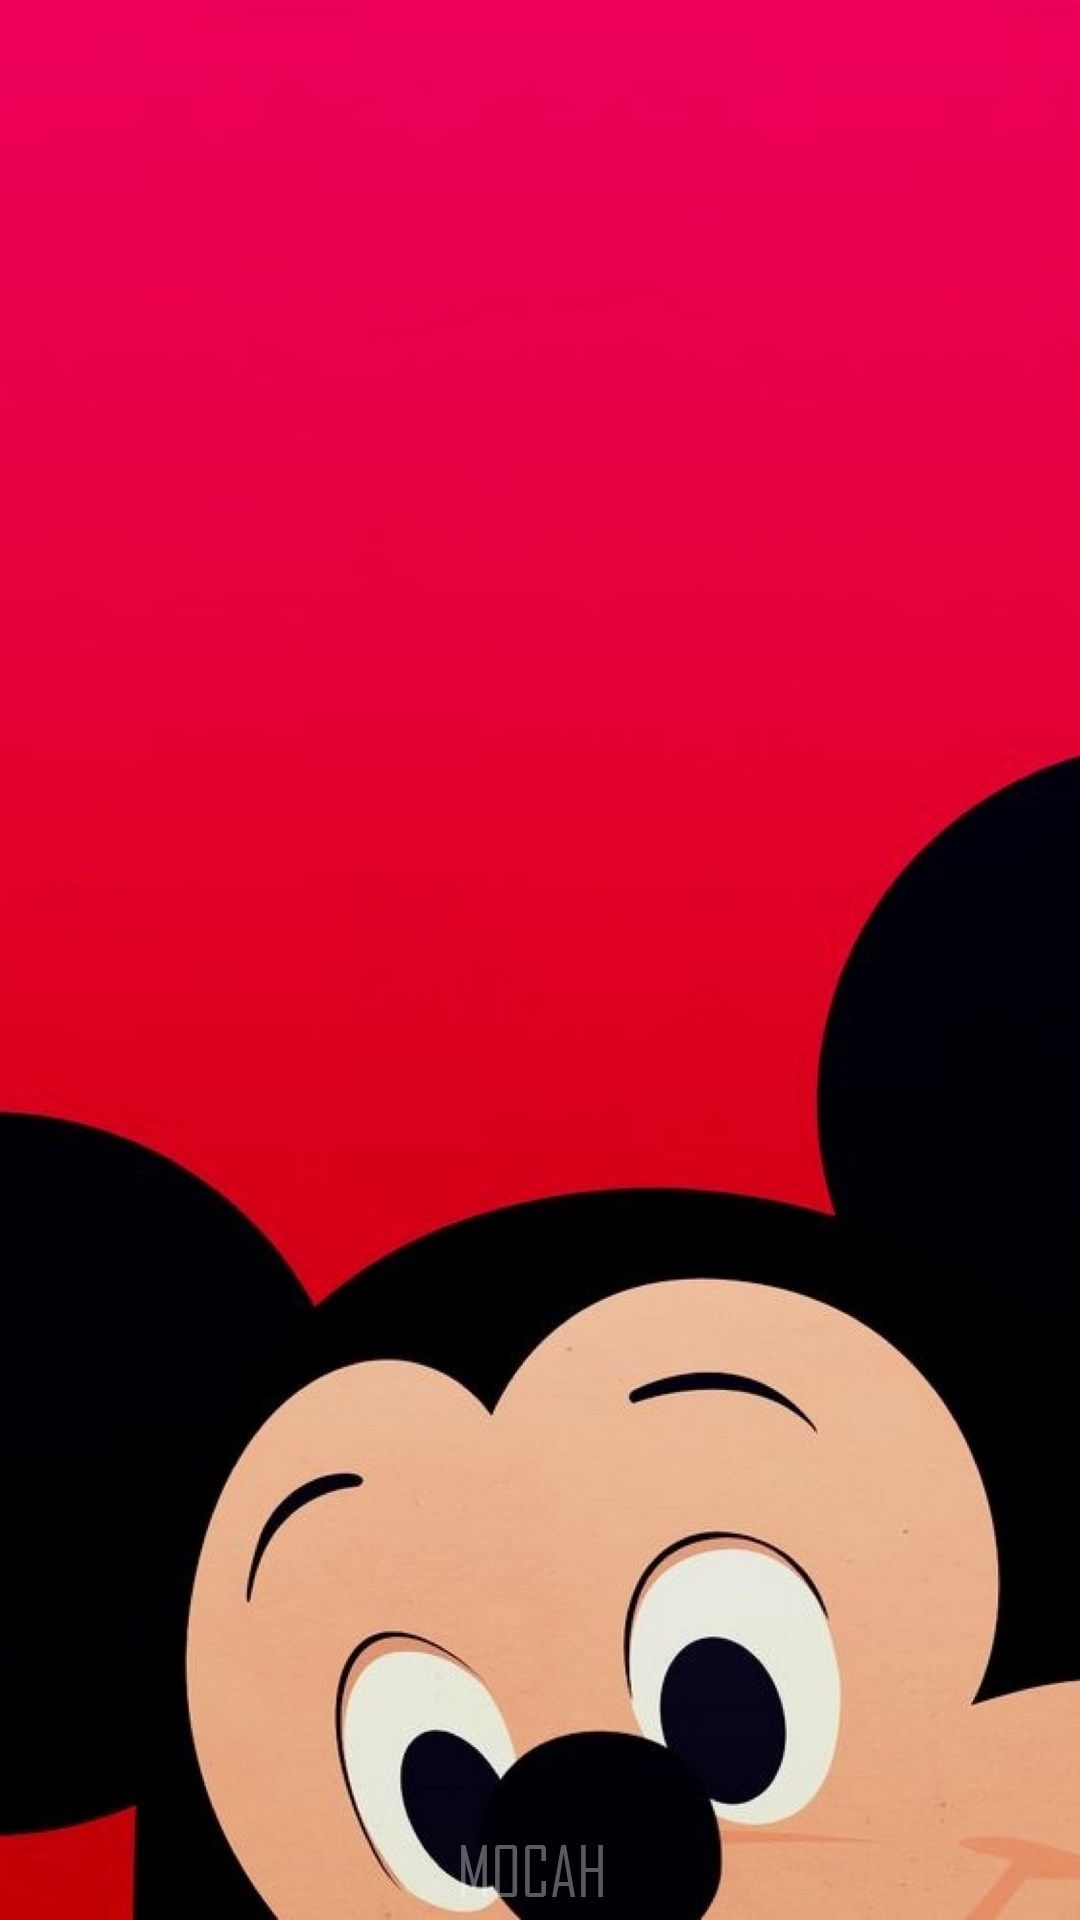  Minnie Mouse Hintergrundbild 1080x1920. Mickey Mouse, Minnie Mouse, The Walt Disney Company, Cartoon, Red, Sony Xperia Z3 Compact wallpaper free download, 720x1280 Gallery HD Wallpaper